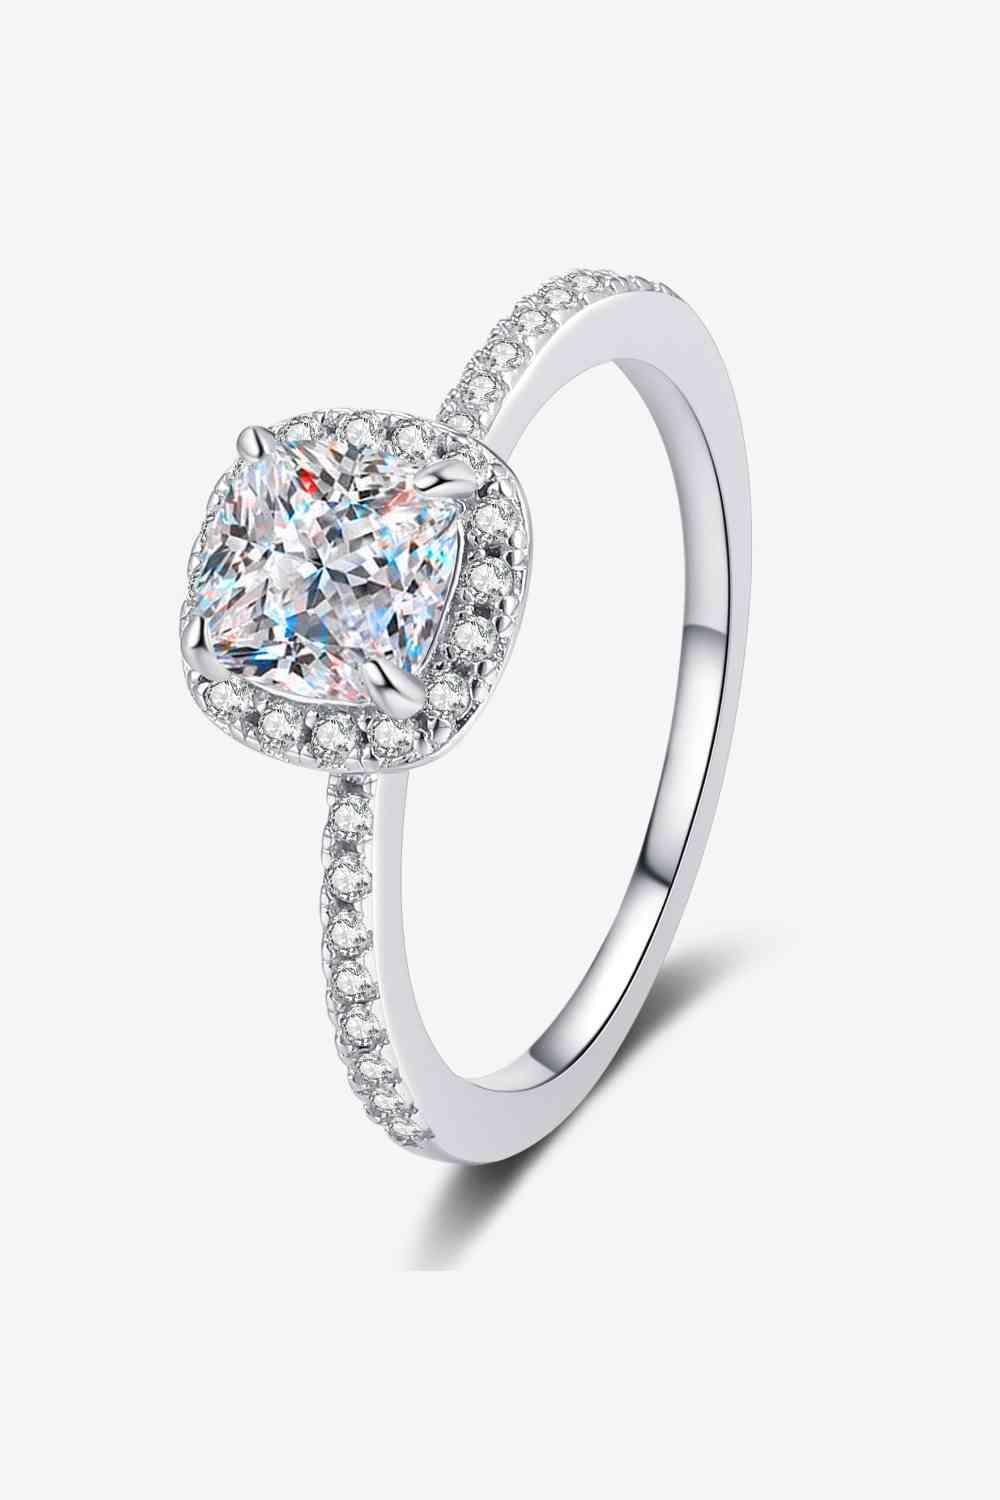 a heart shaped diamond ring with diamonds on the sides